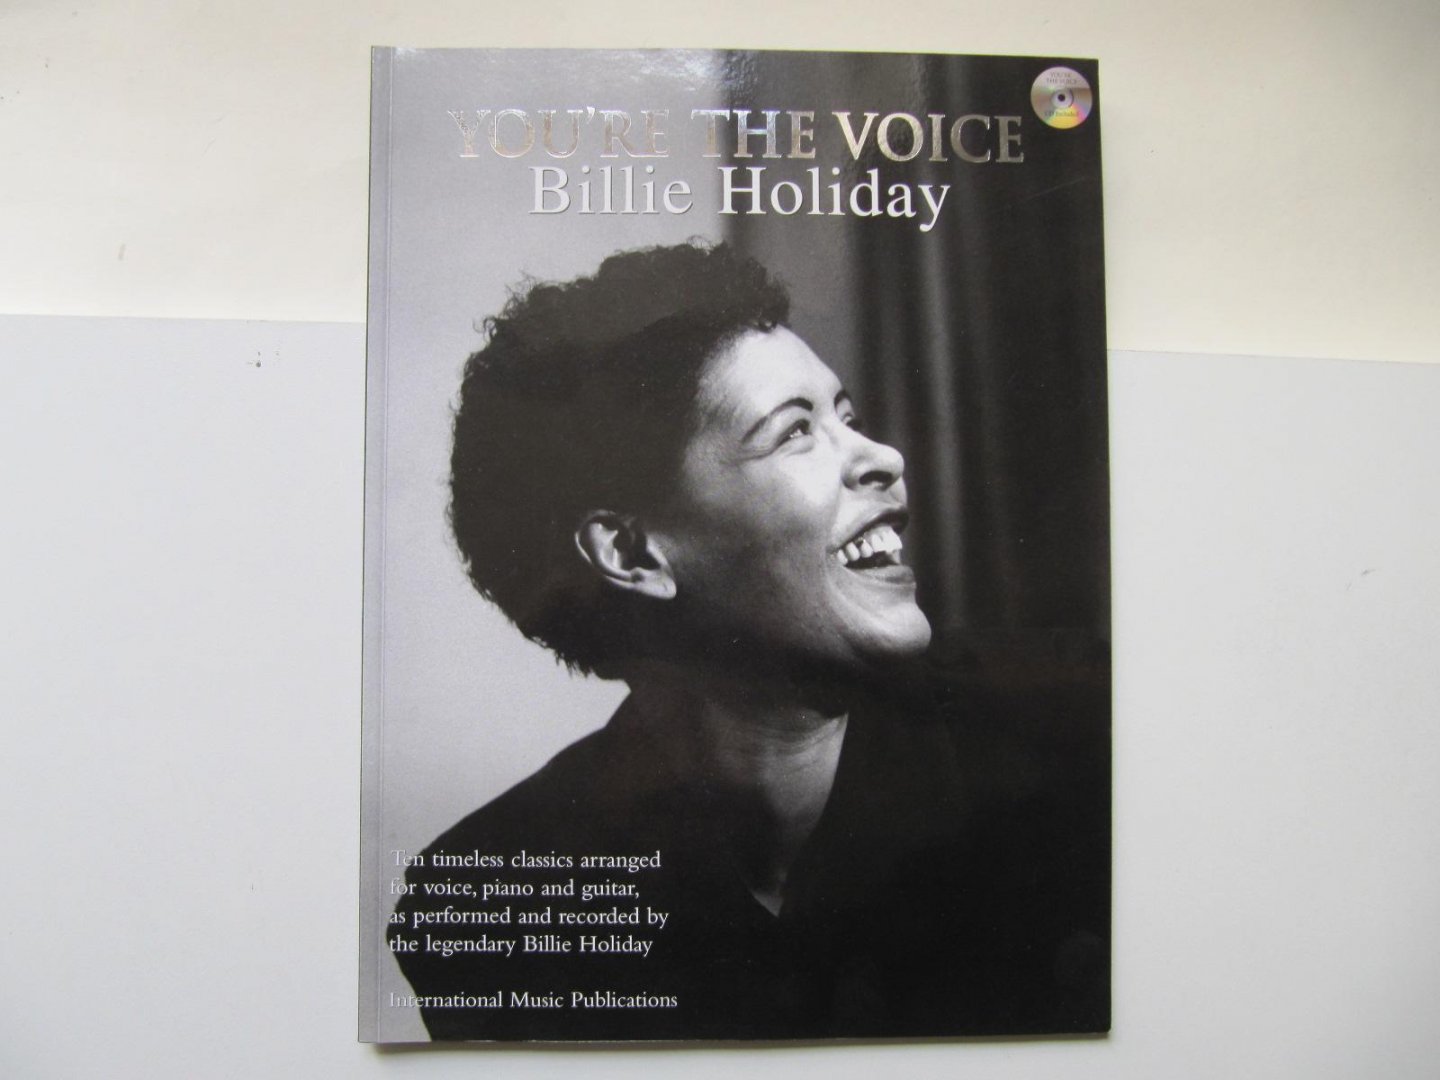 Billie Holyday - You're the Voice